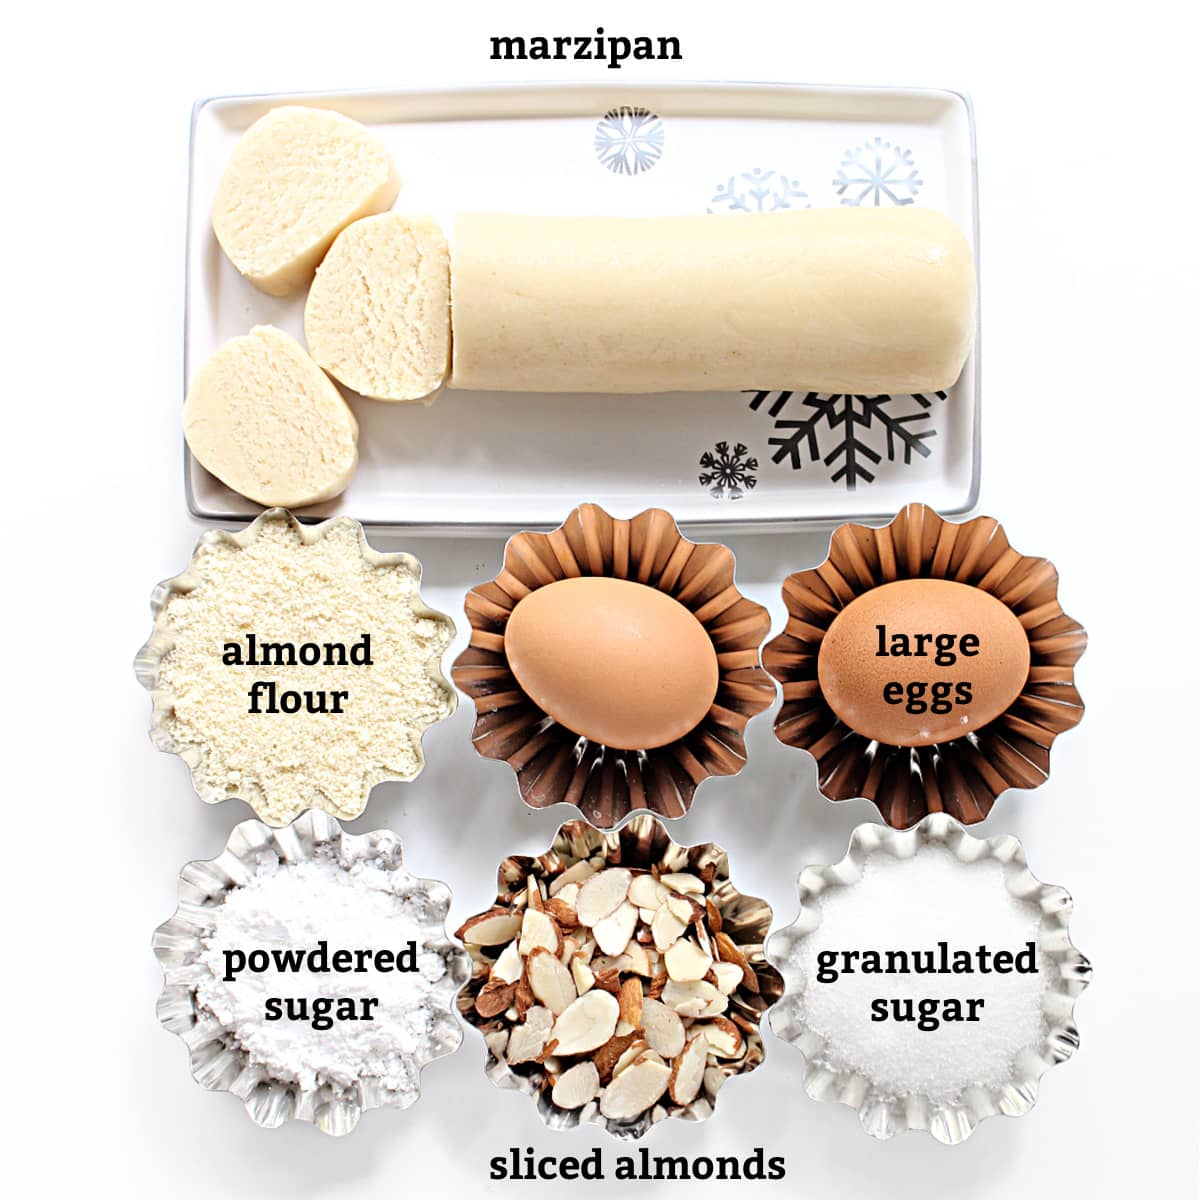 Ingredients labeled; marzipan, almond flour, large eggs, powdered sugar, sliced almonds, granulated sugar.